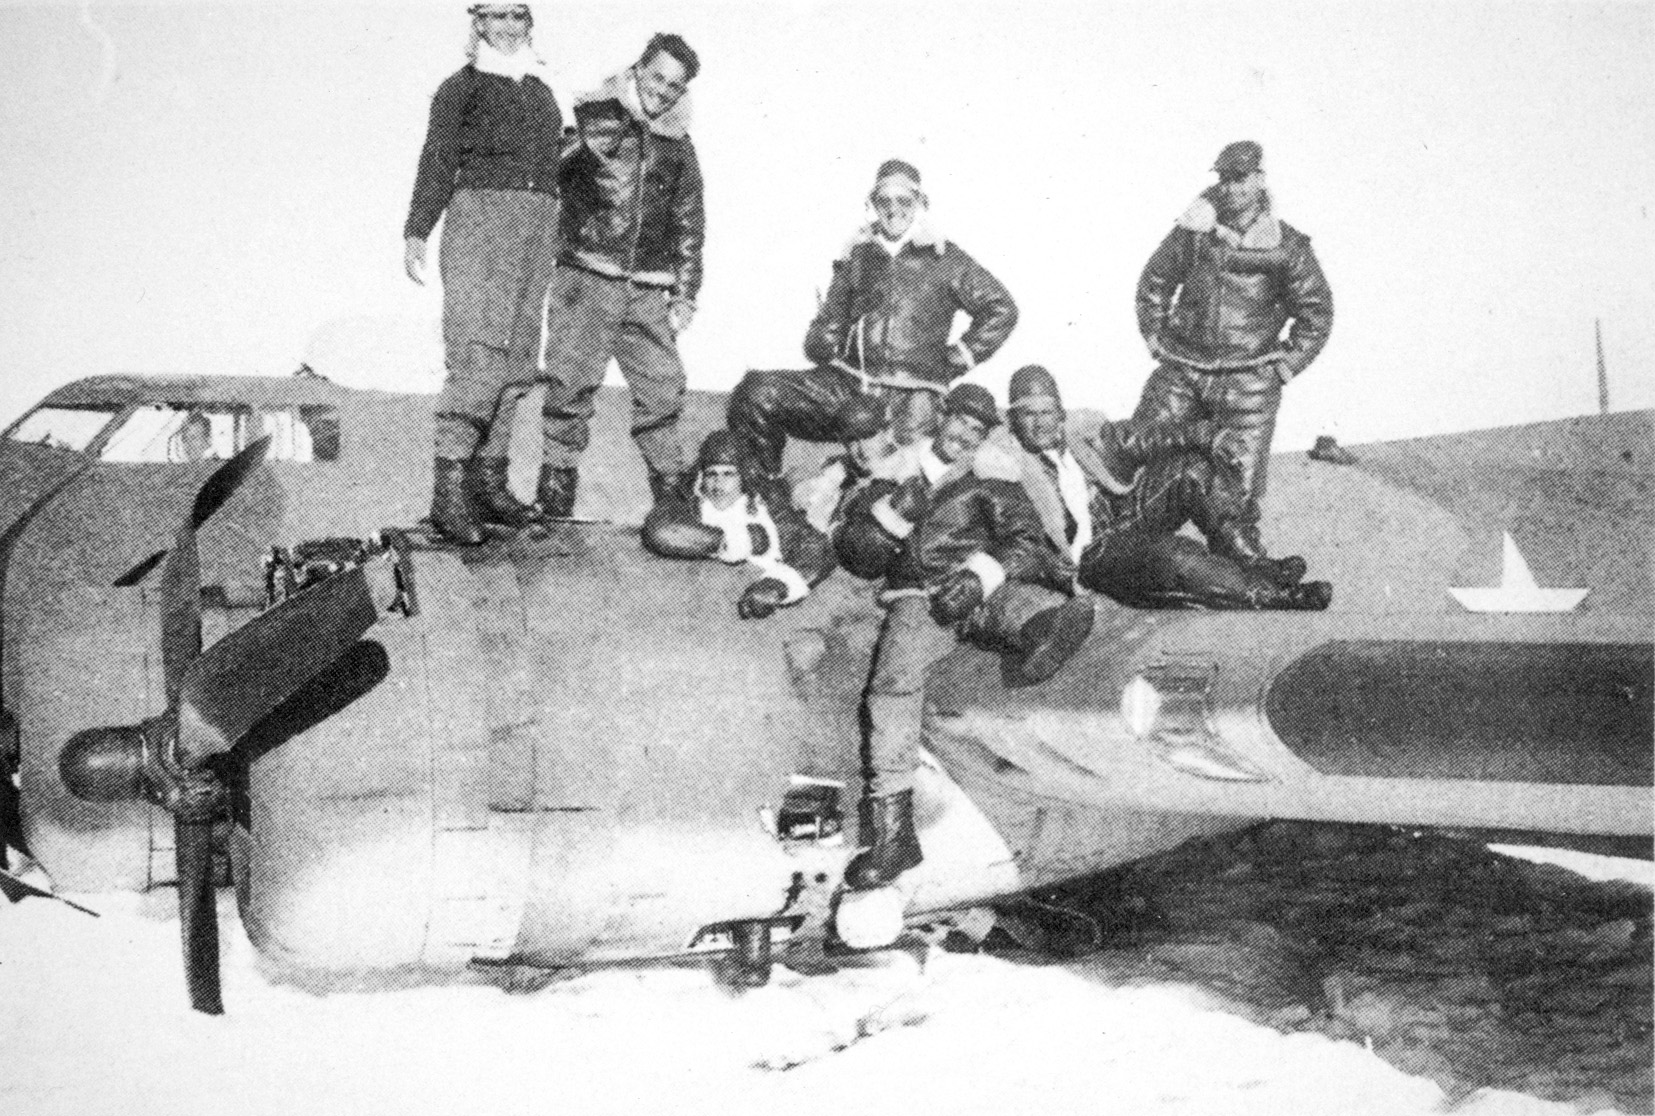 Shortly after their emergency landing on Greenland’s polar ice cap, crew members of a Boeing B-17 Flying Fortress bomber pose atop their damaged aircraft.